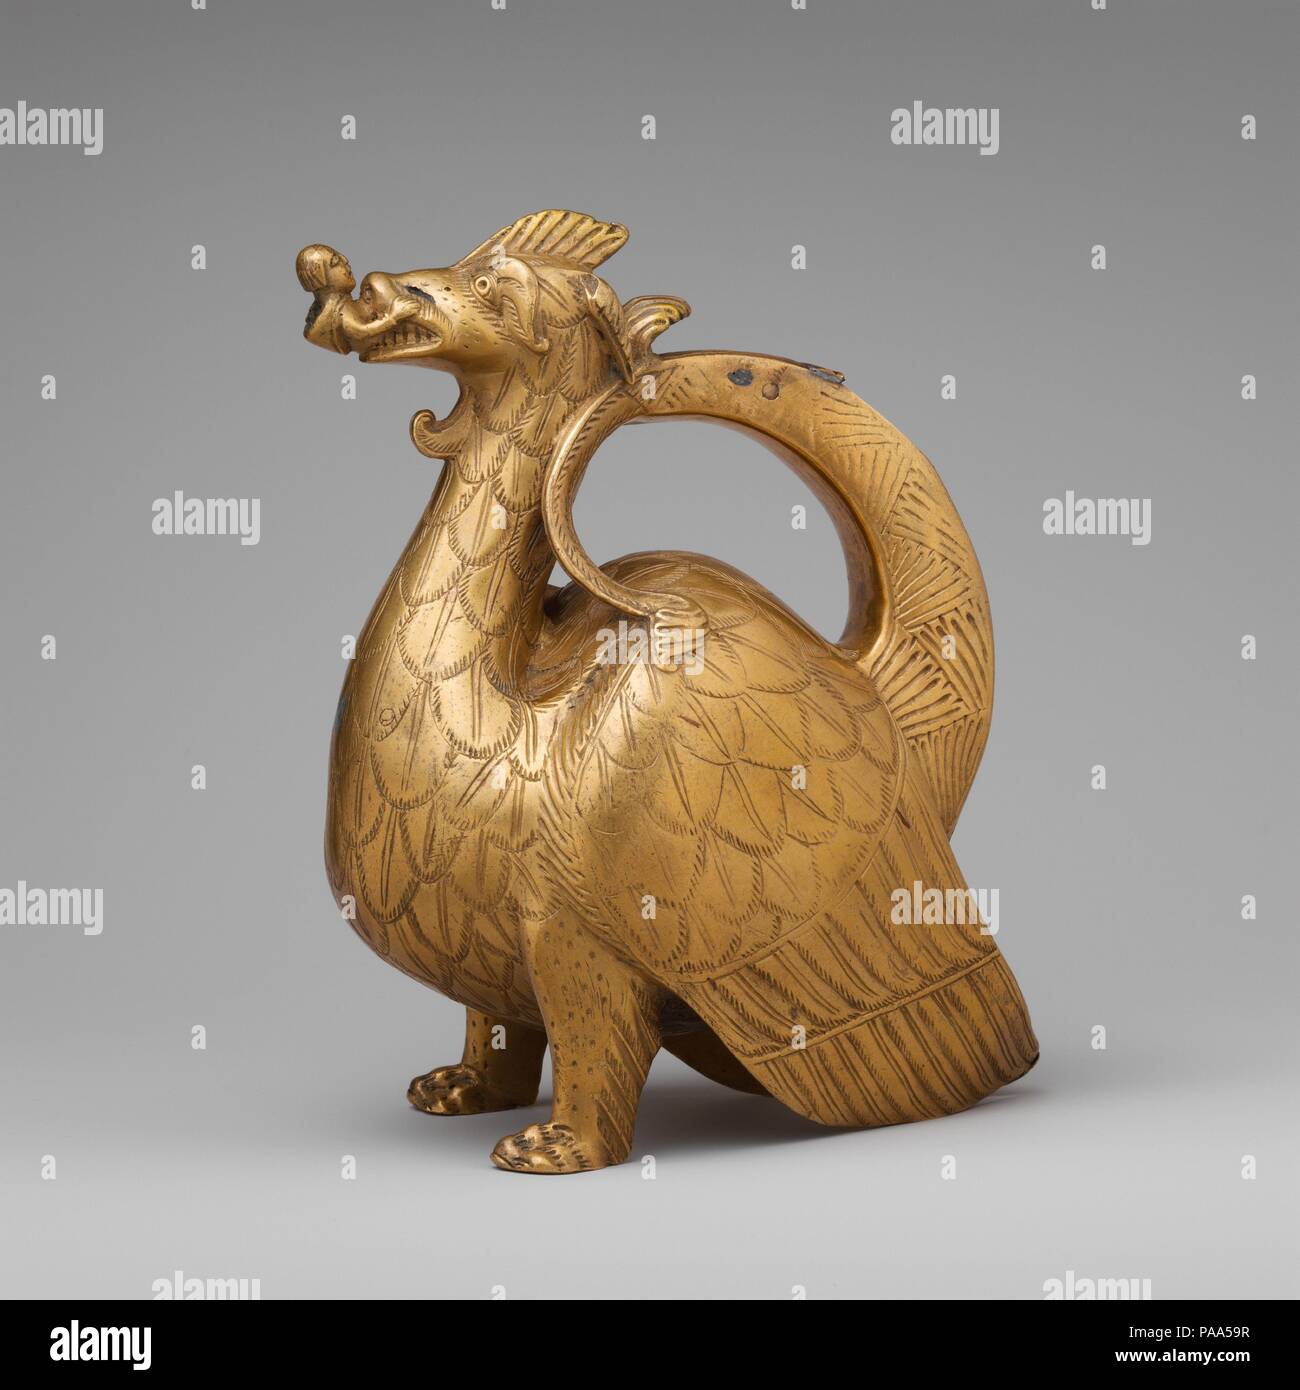 Aquamanile in the Form of a Dragon. Culture: North German. Dimensions: Overall: 8 3/4 x 7 1/4 in., 4.4 lb. (22.2 x 18.4 cm, 2 kg)  Overall PD: 8 3/8 x 4 3/8 x 7 3/16 in. (21.2 x 11.1 x 18.2 cm)  Thickness PD: 3/25 in. (0.3 cm). Date: ca. 1200.  Aquamaniles, which are water vessels used for washing hands, served both liturgical and secular purposes. Those made in the shape of an animal are among the most distinctive products of medieval craftsmen. The most commonly seen zoomorphic aquamaniles are lions, but dragons, griffins, and many other forms were also produced (see acc. nos. 47.101.51, 199 Stock Photo